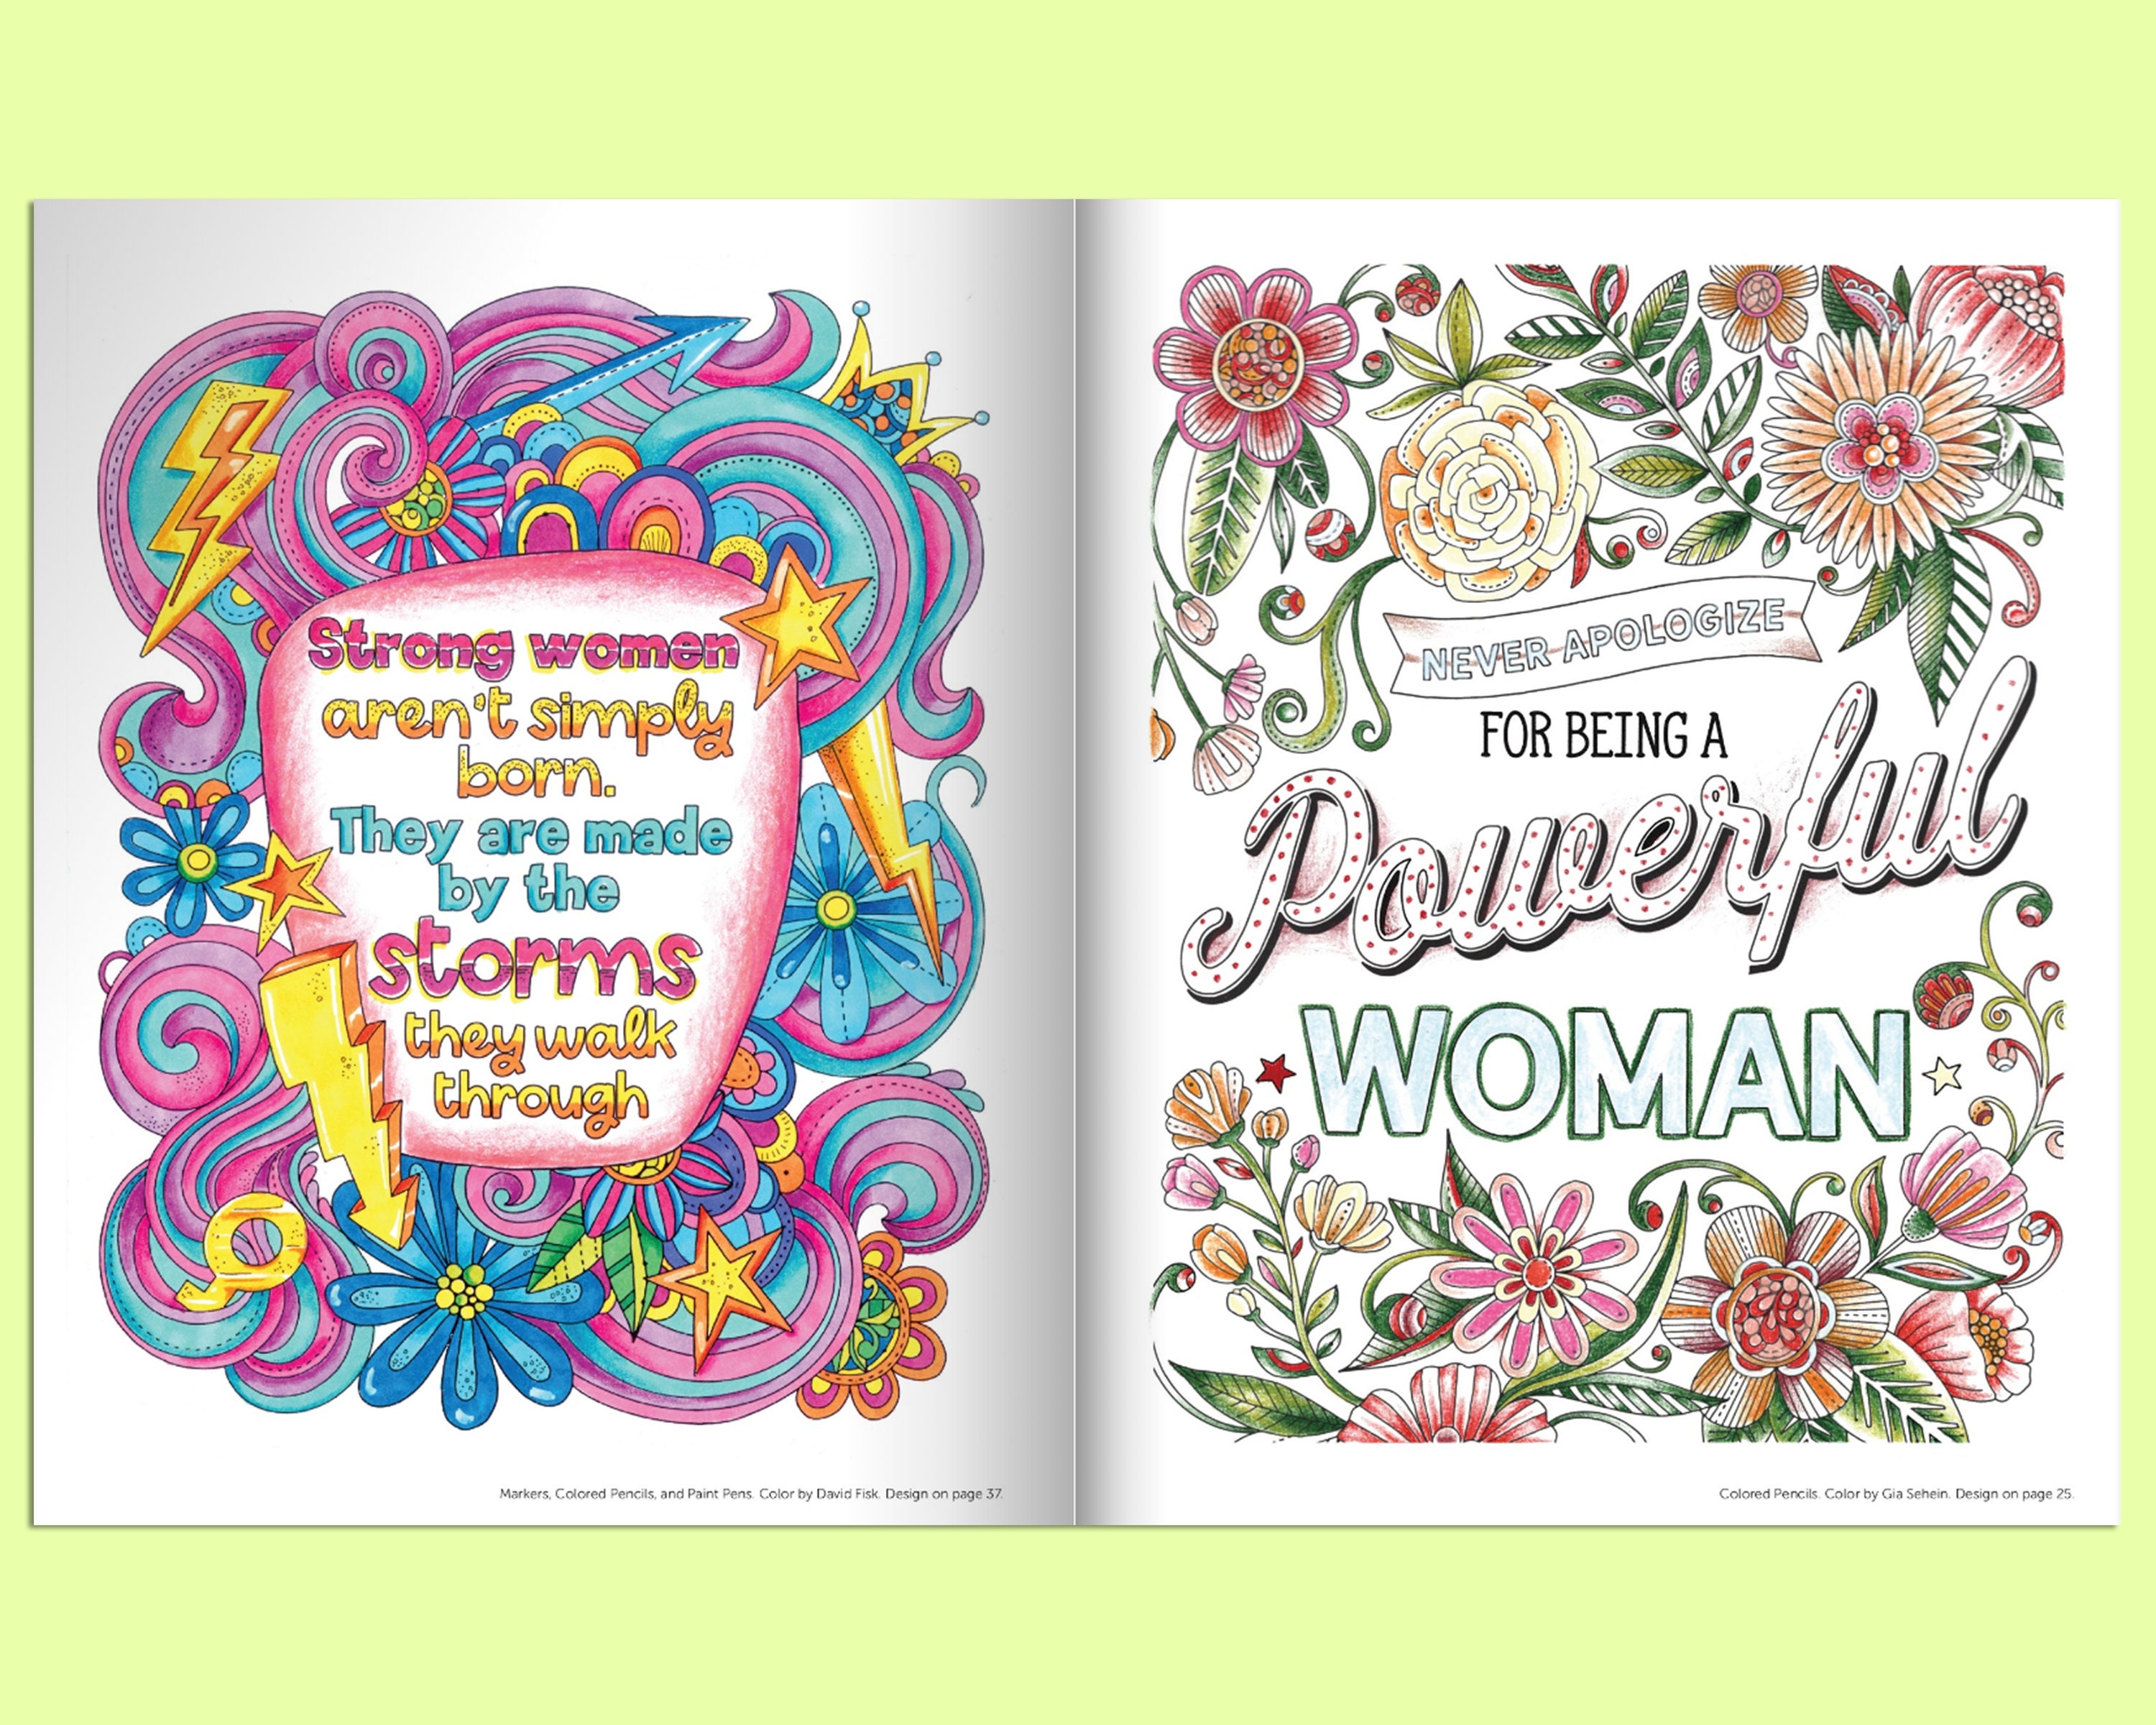 Empowering Women Coloring Book - 6 pages